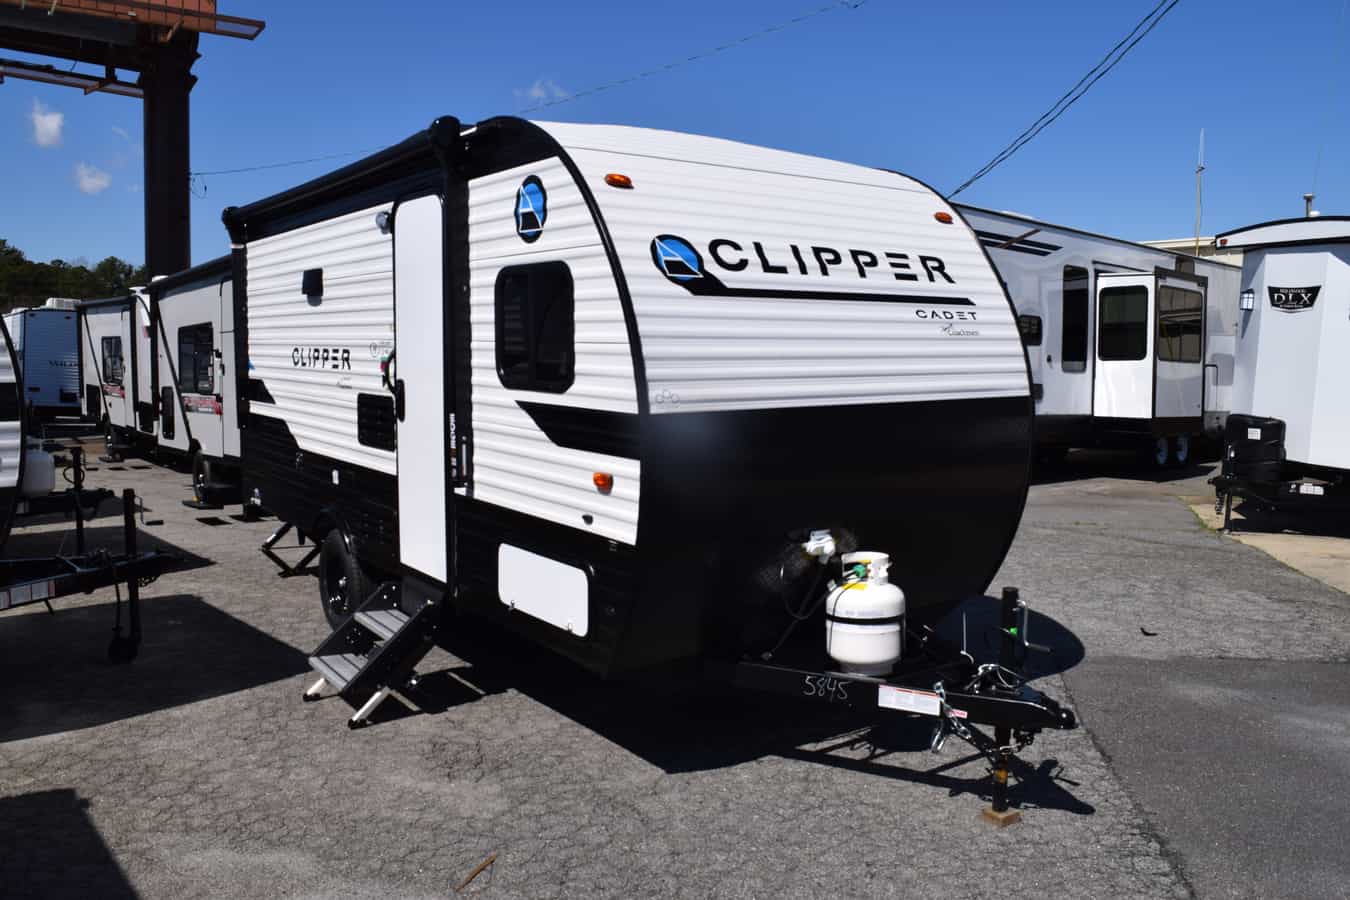 NEW 2020 Forest River CLIPPER 17CBH CADET